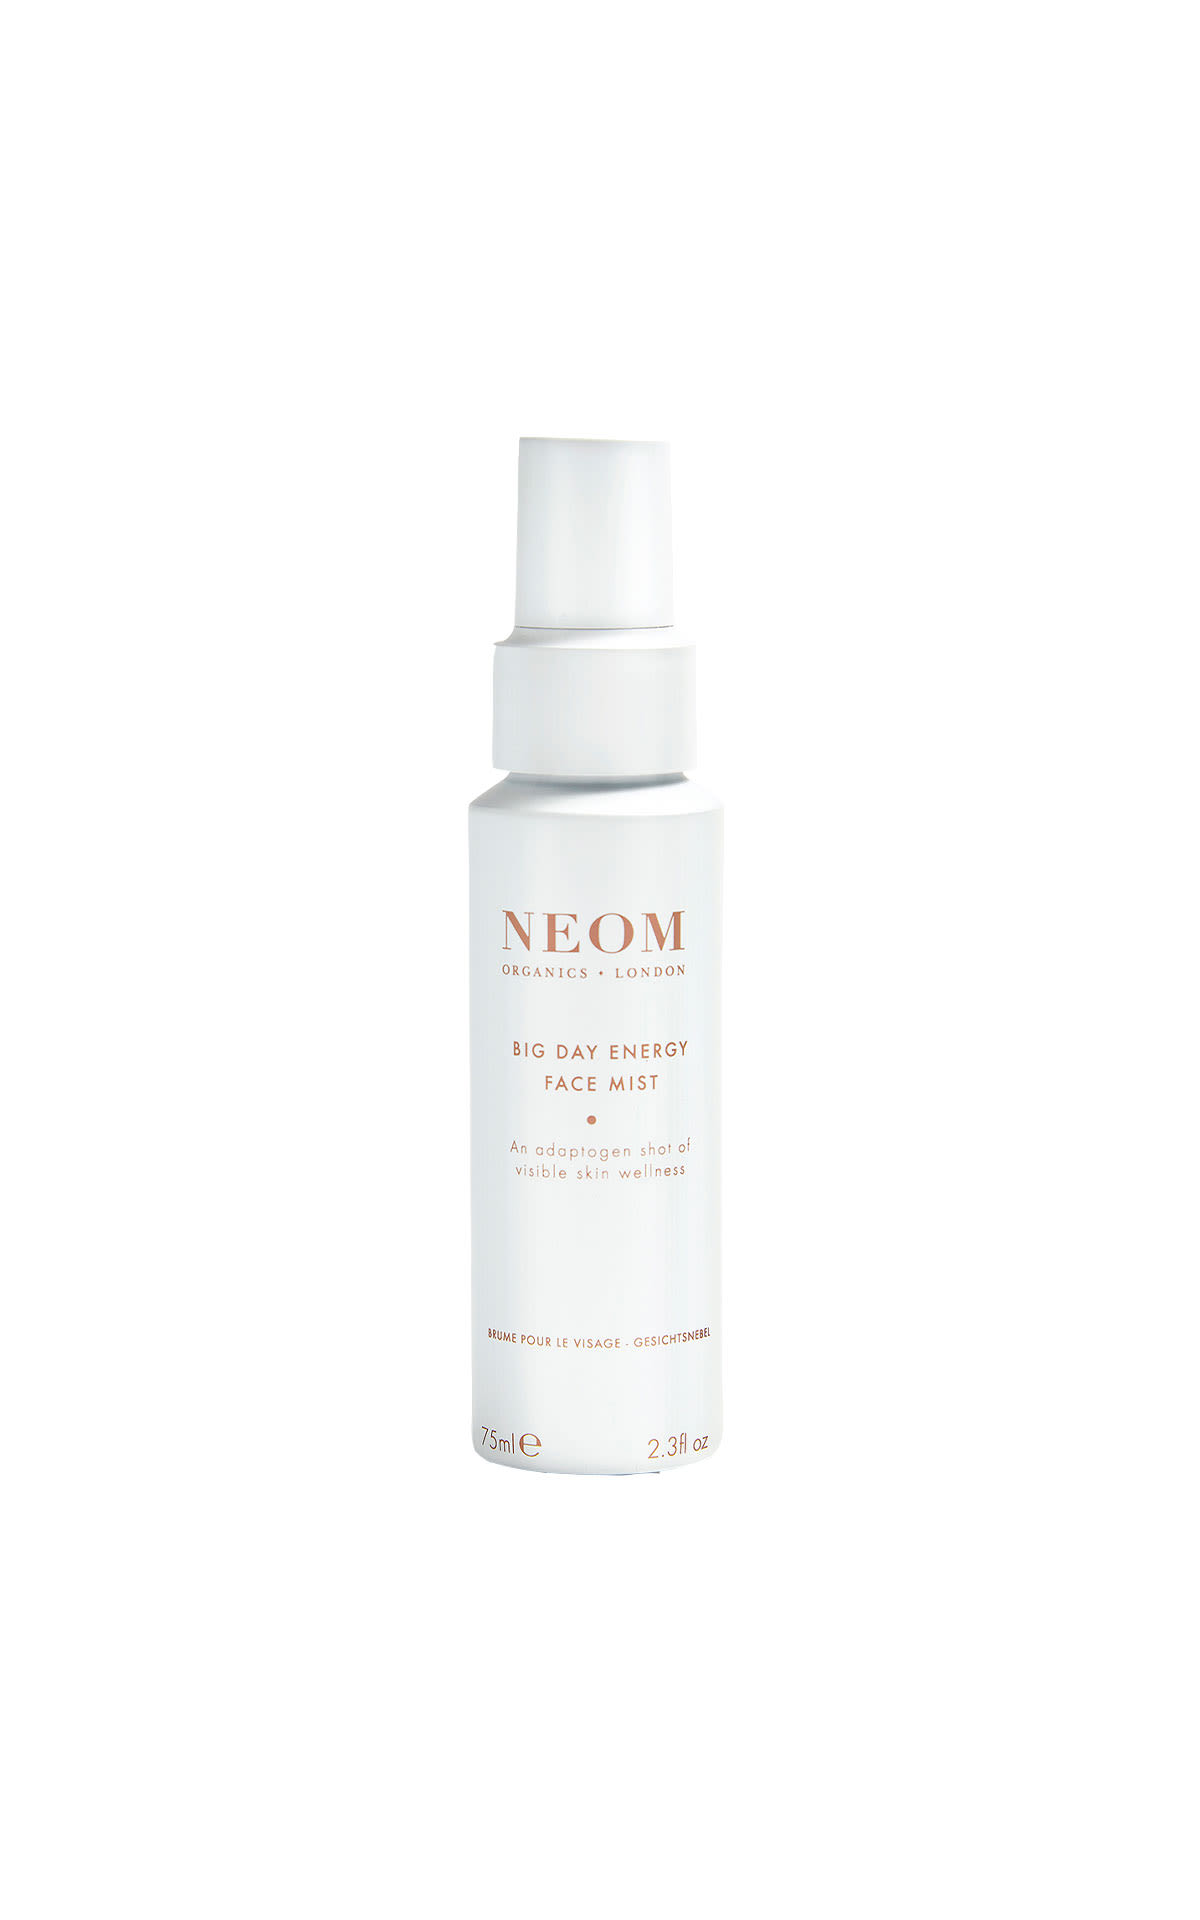 NEOM Big day energy face mist from Bicester Village